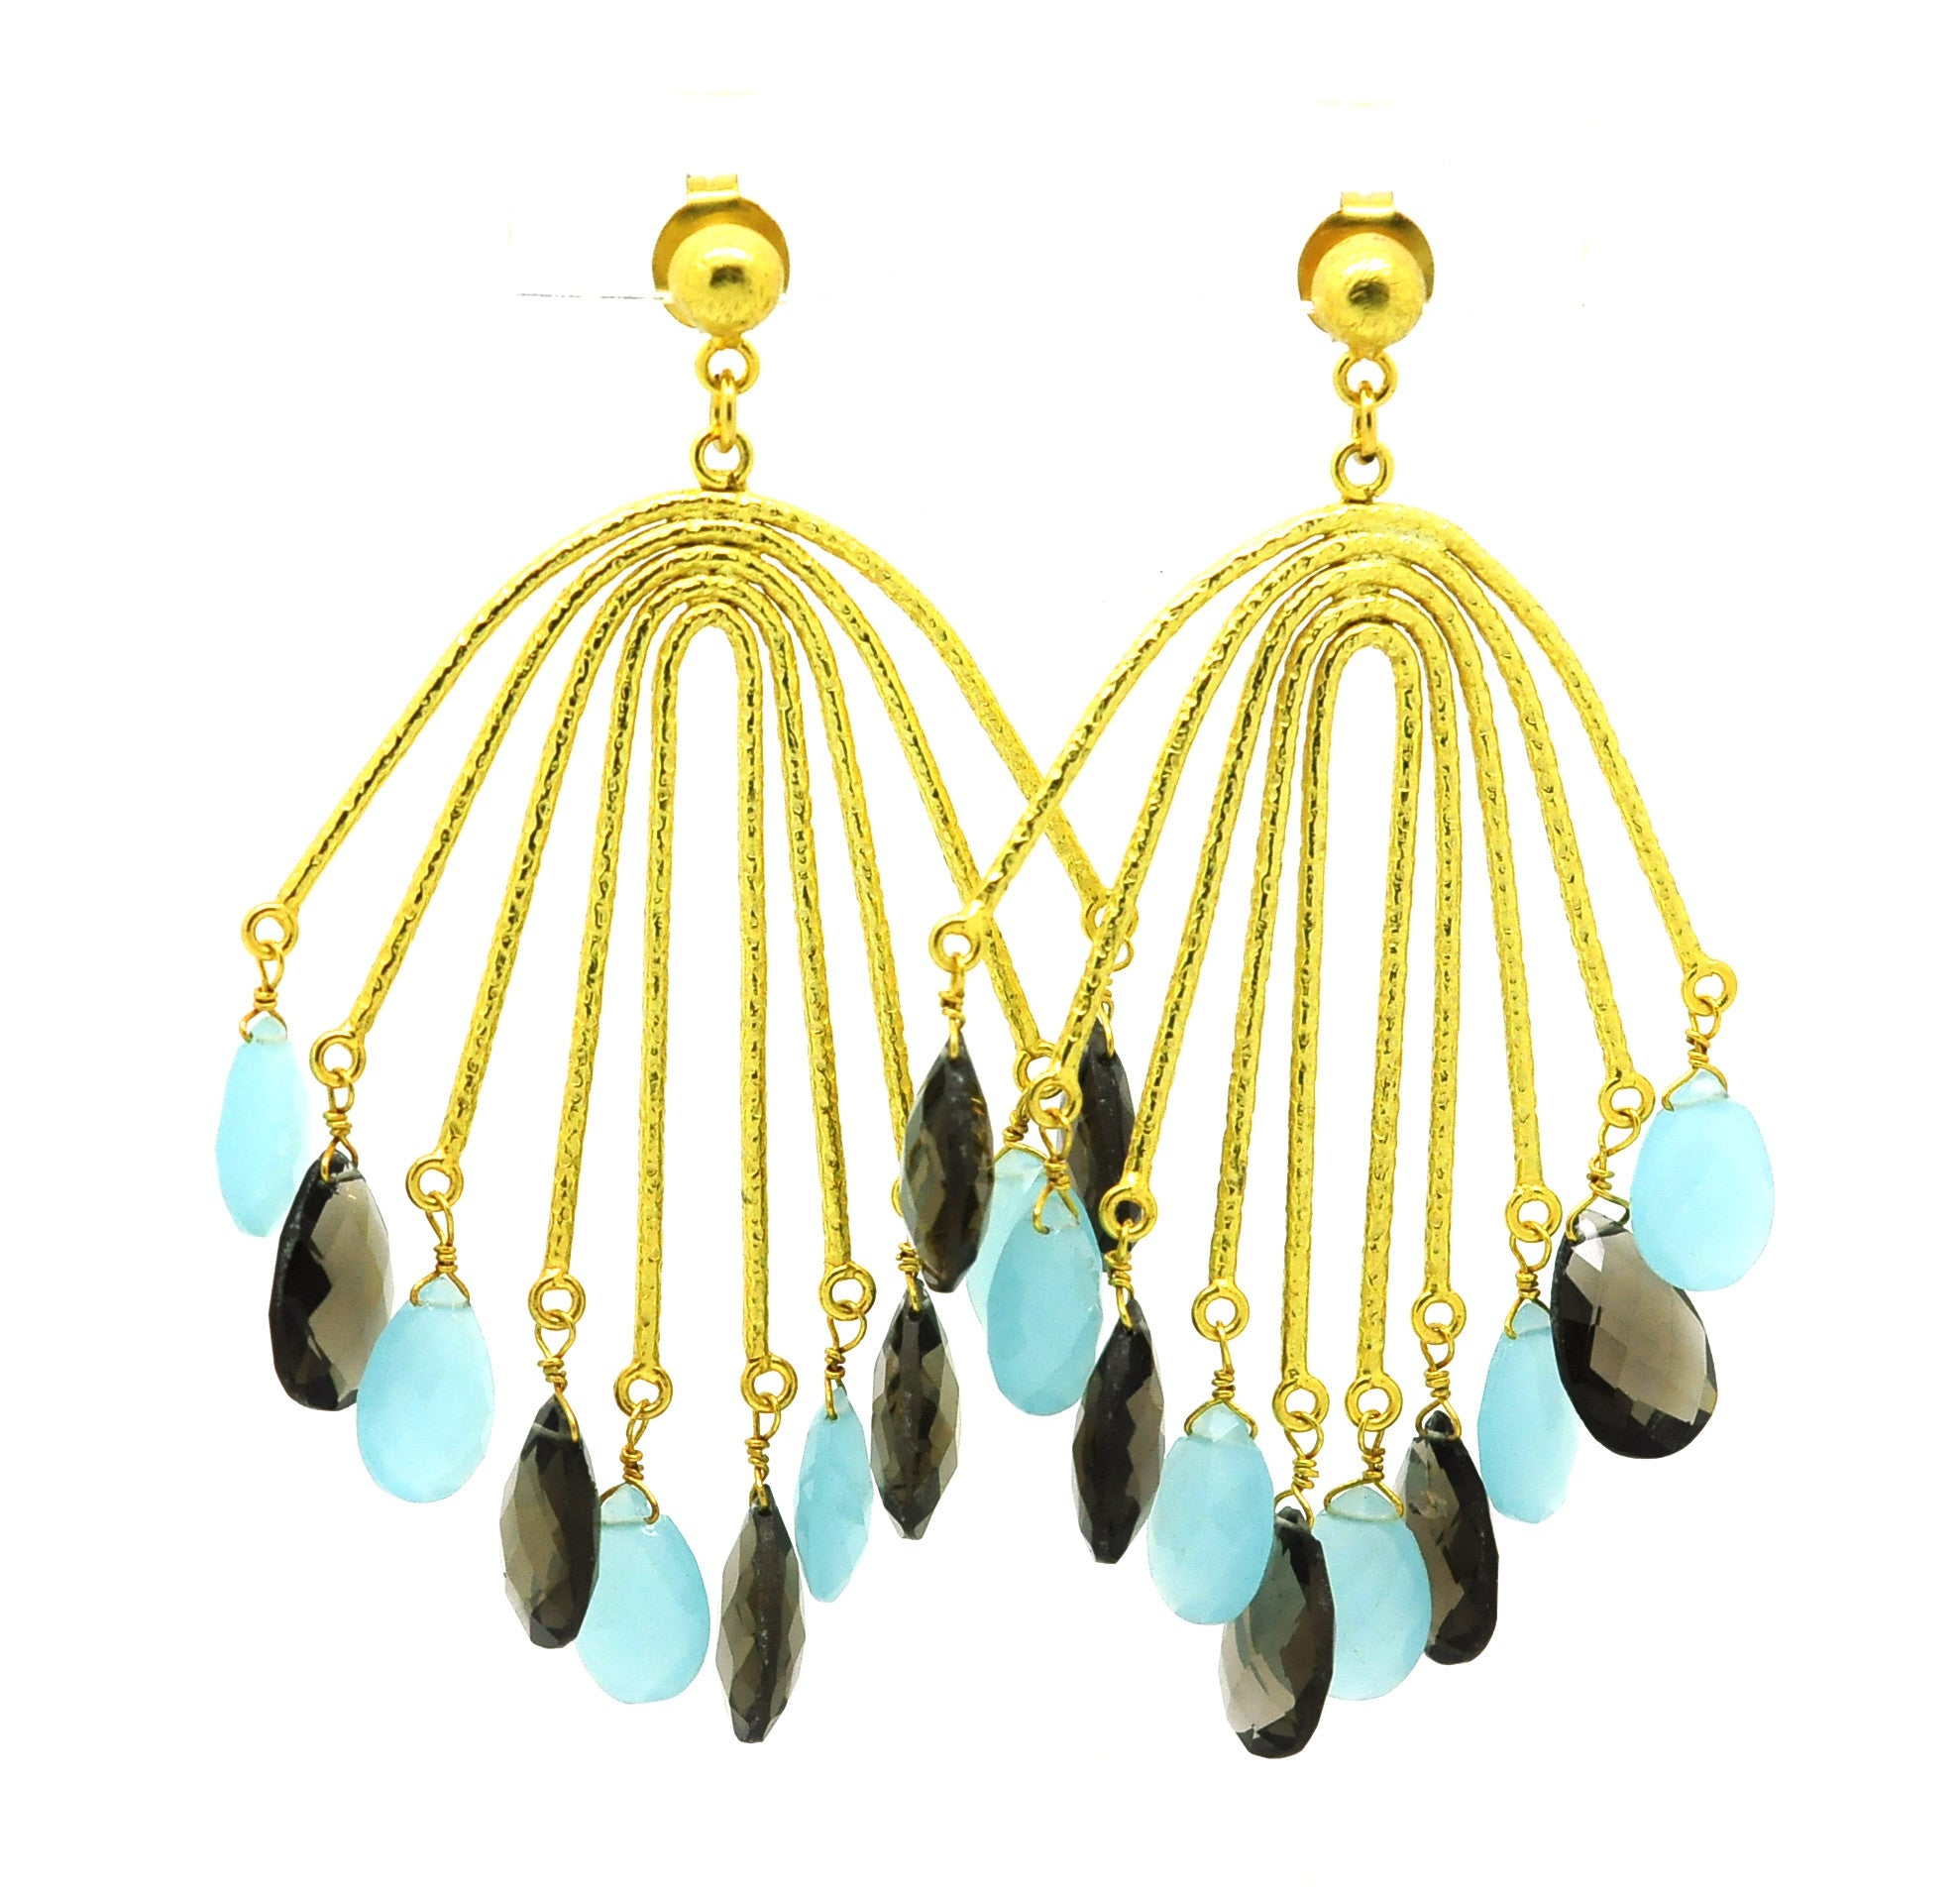 SOLD - ON SALE Large drop earrings 1 (clearance)